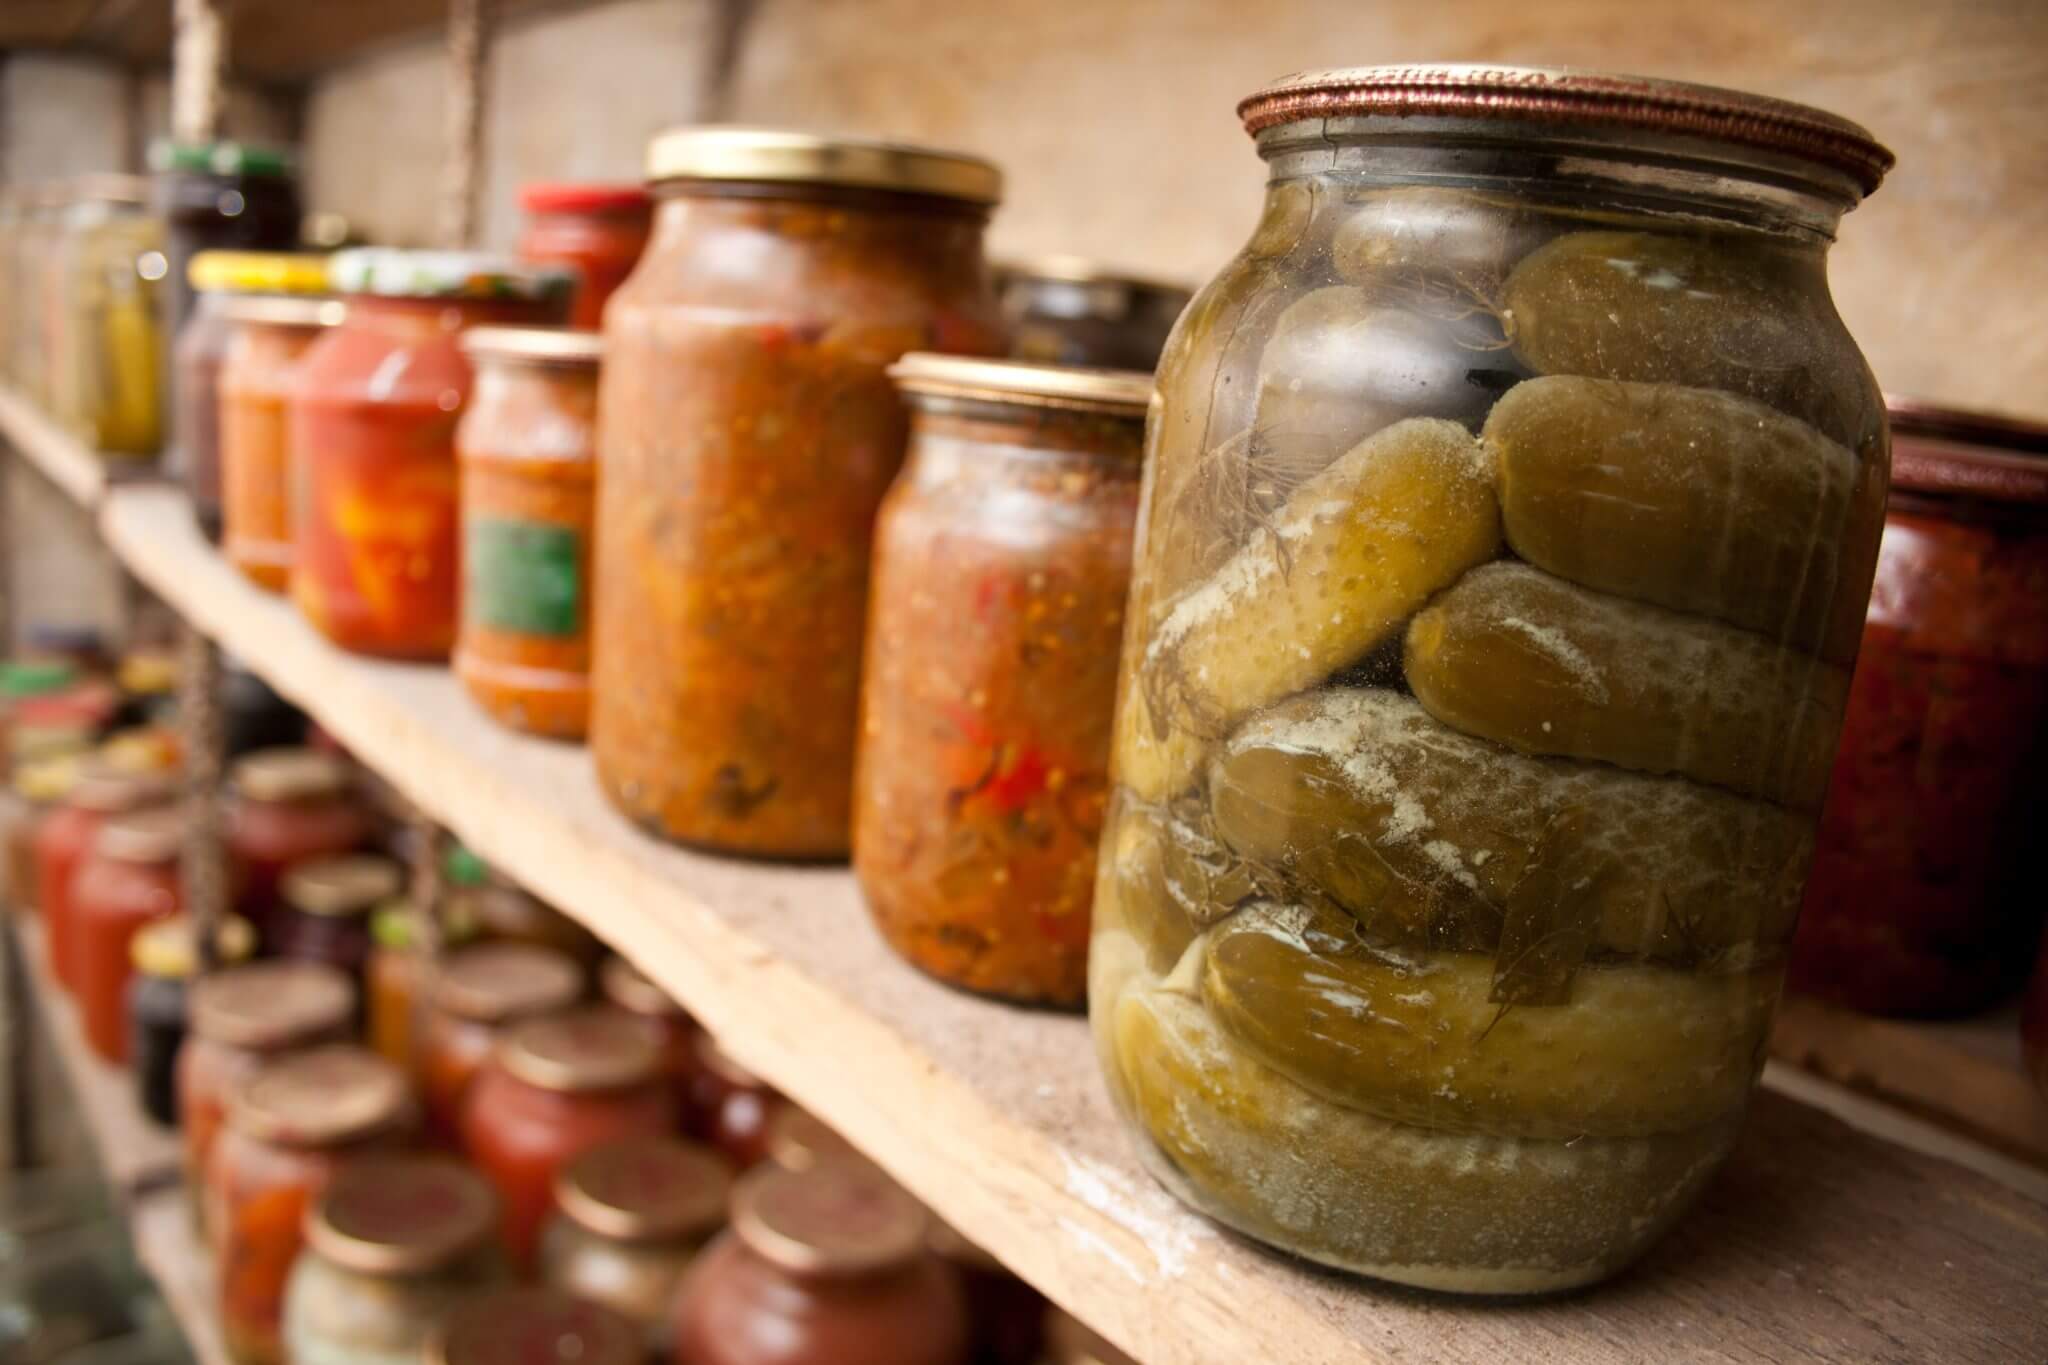 A jar of preserved pickles sits next to other jar goods on basement pantry shelves.